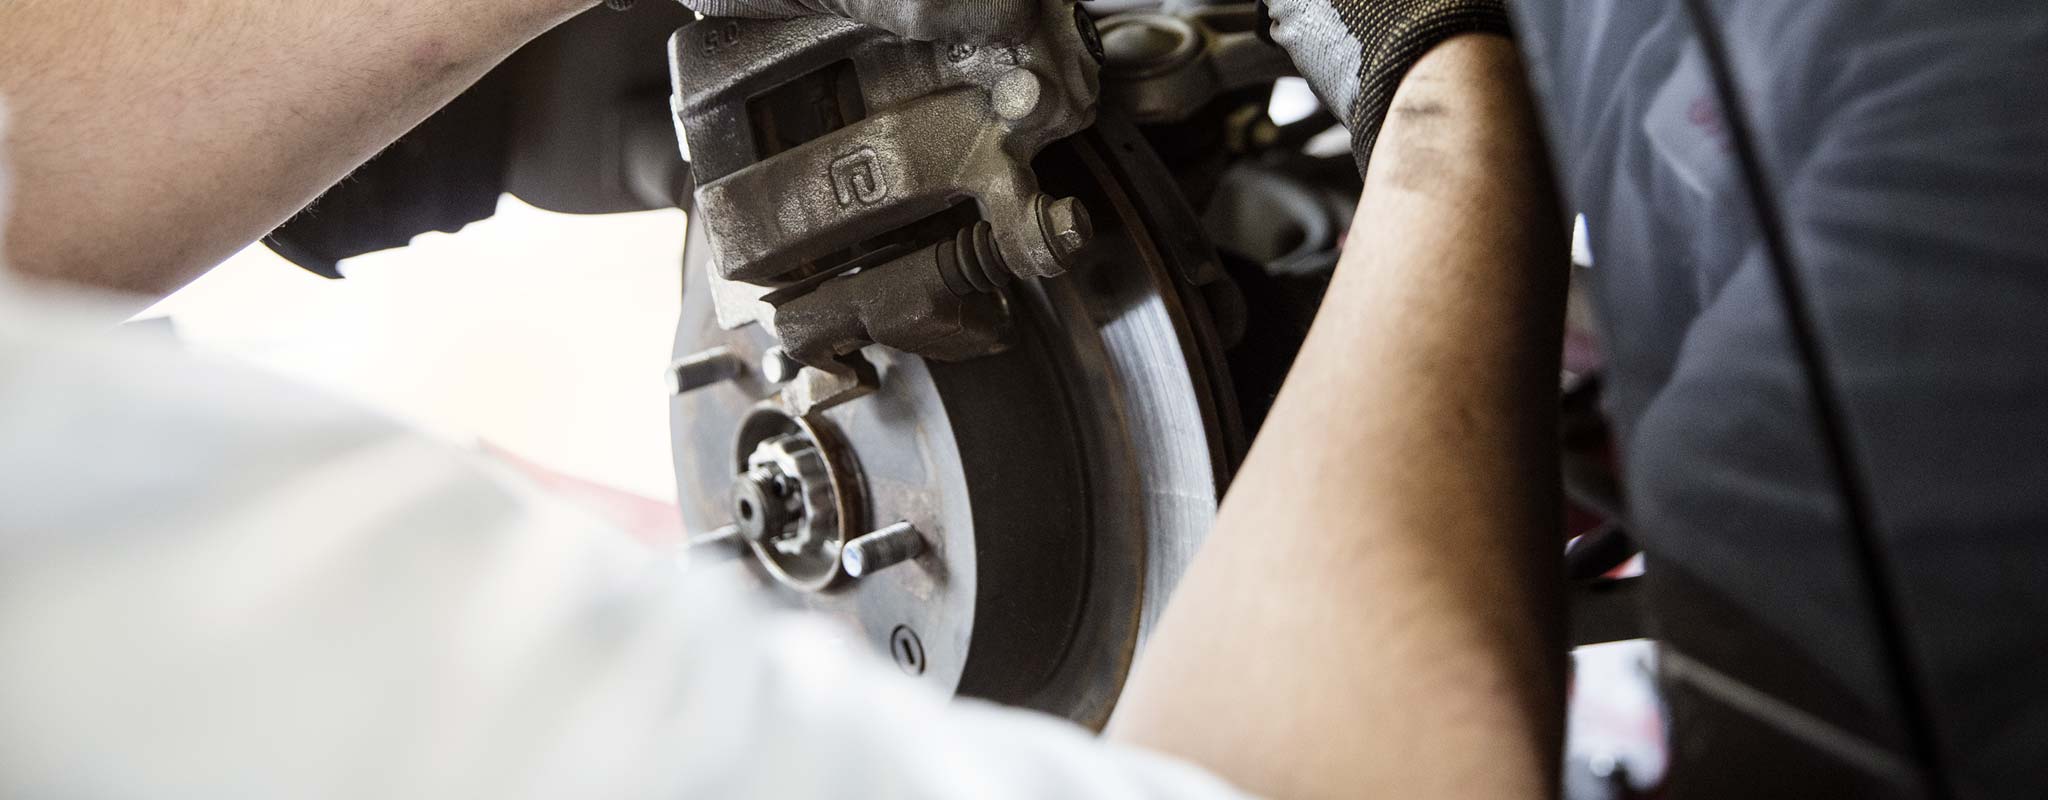 Close up view of a technician working on a brake system.